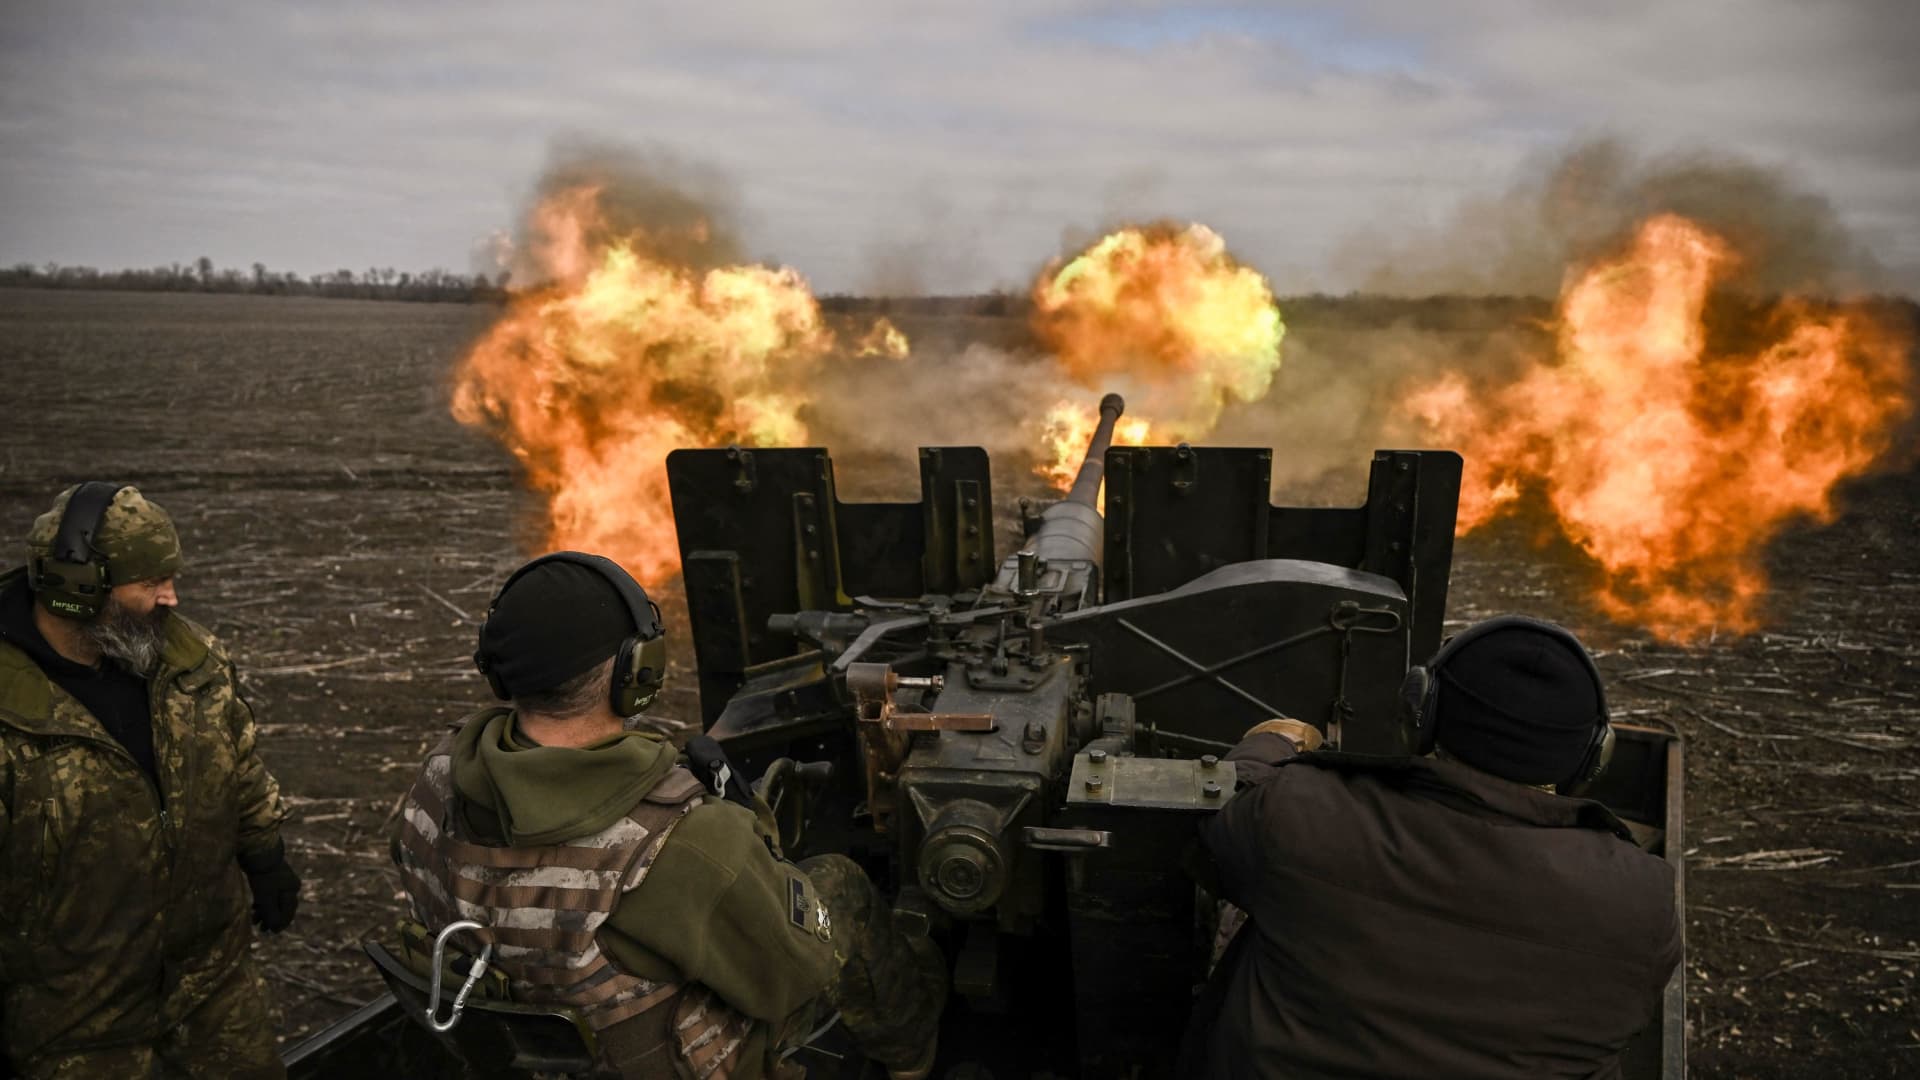 Ukrainian servicemen fire with a S60 anti-aircraft gun at Russian positions near Bachmut on March 20, 2023, amid the Russian invasion of Ukraine.